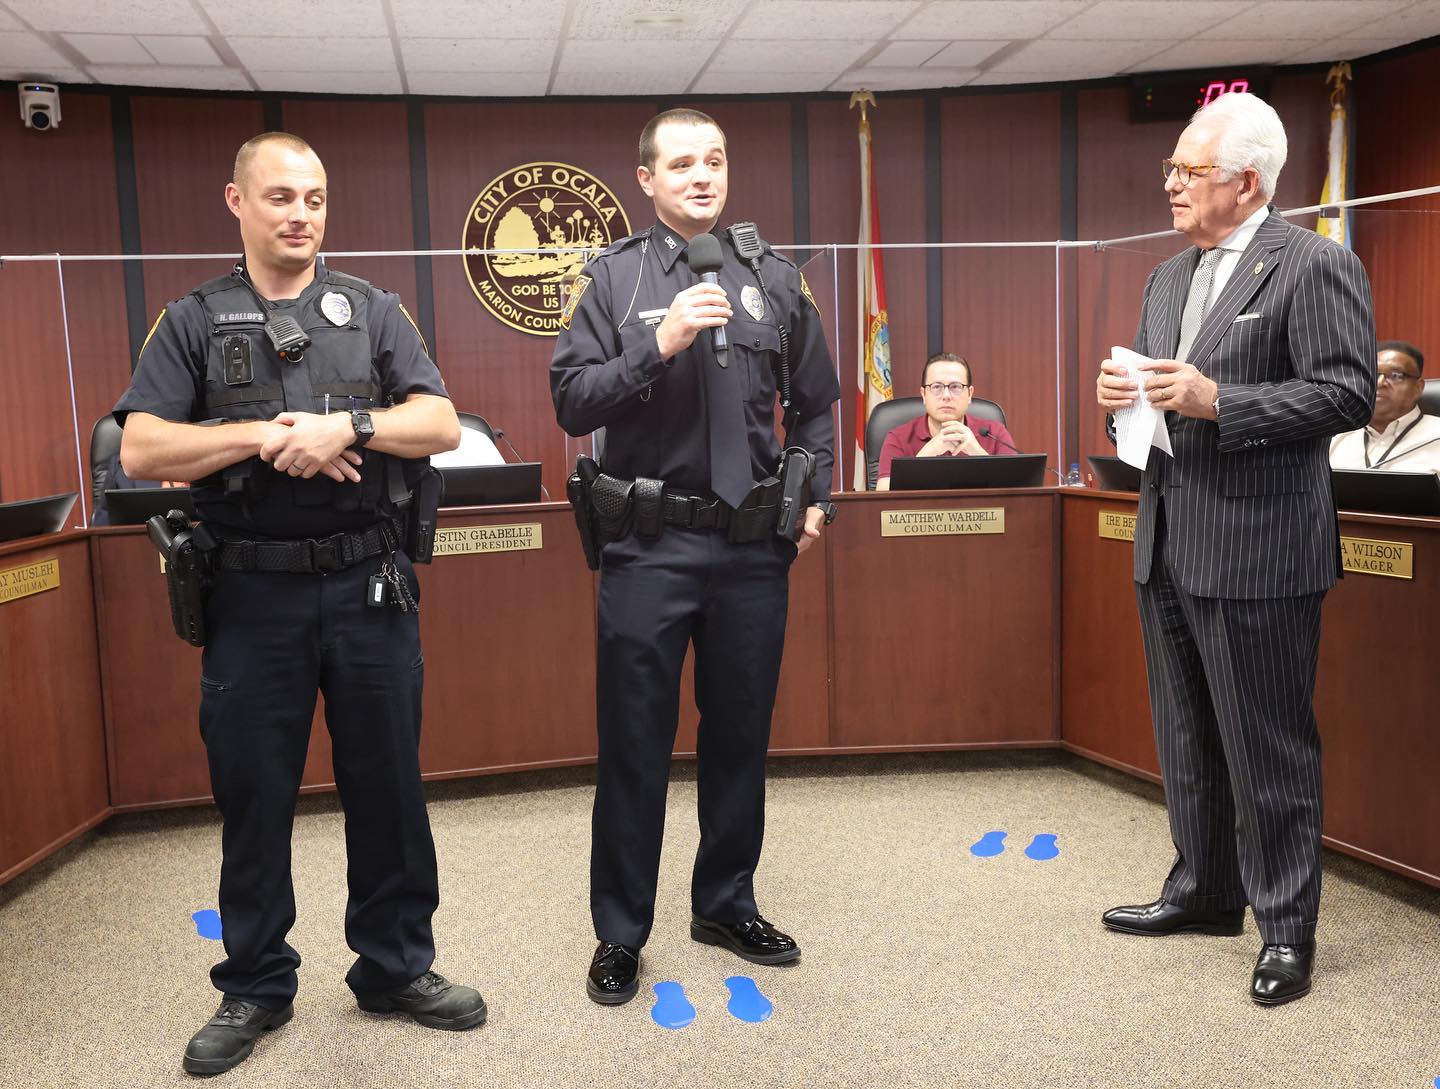 Ocala City Council recognizes officers' lifesaving efforts in house